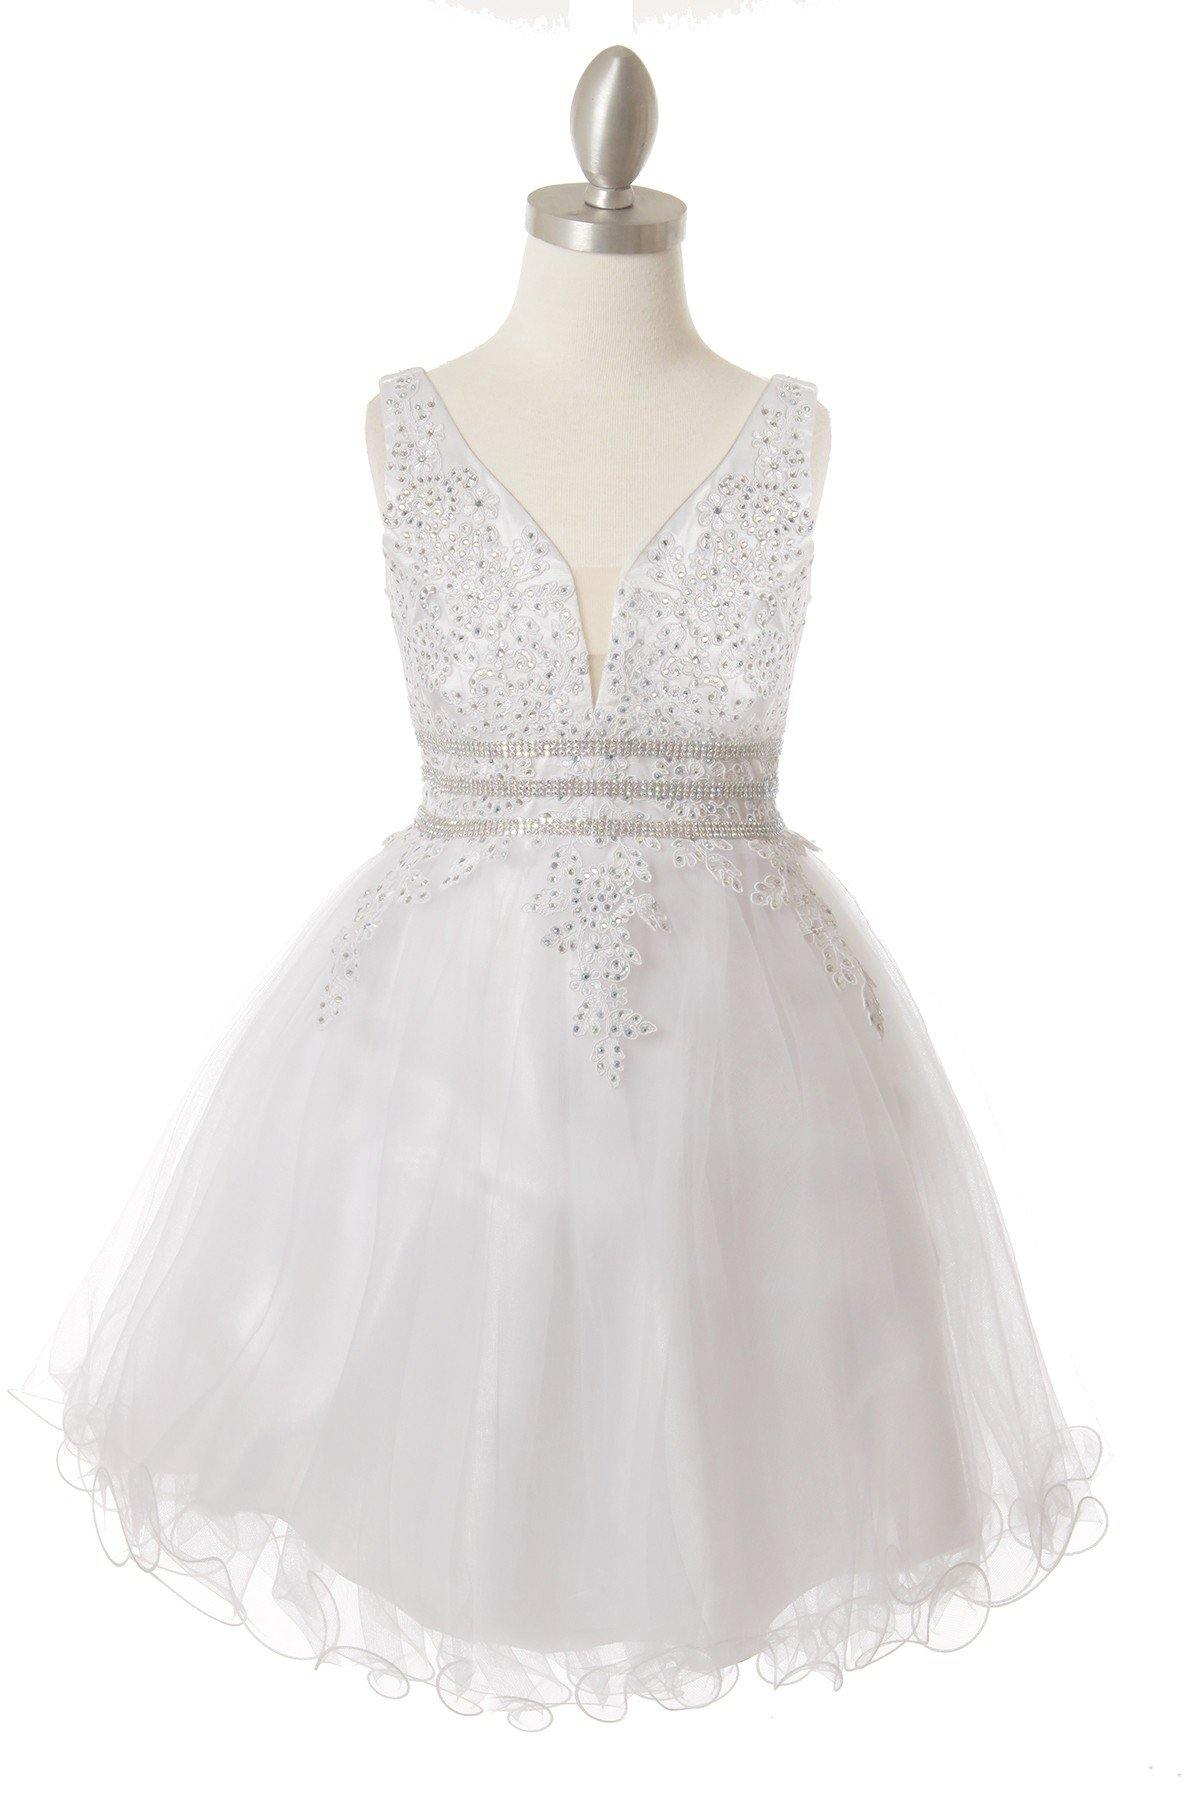 Sleeveless Flower Girl Dress - The Dress Outlet Cinderella Couture